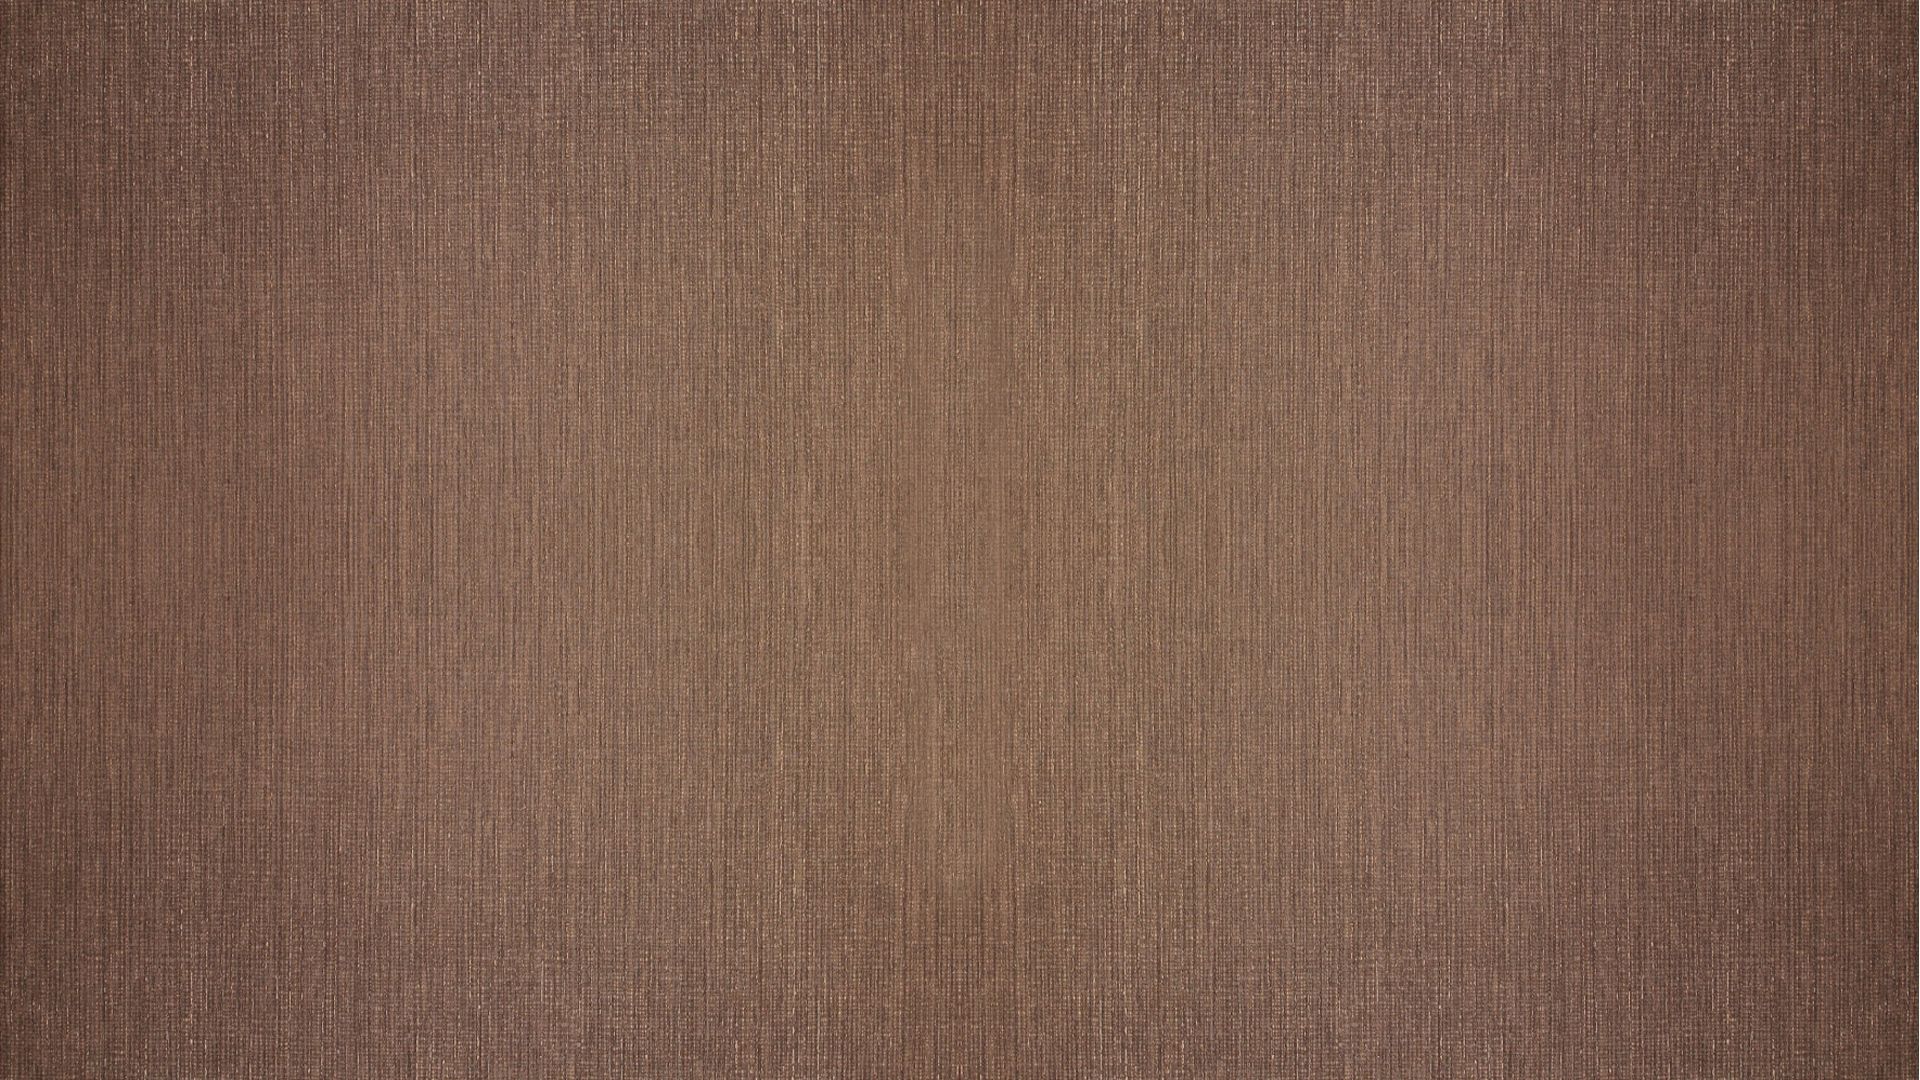 brown, textures, texture, surface, faded mobile wallpaper